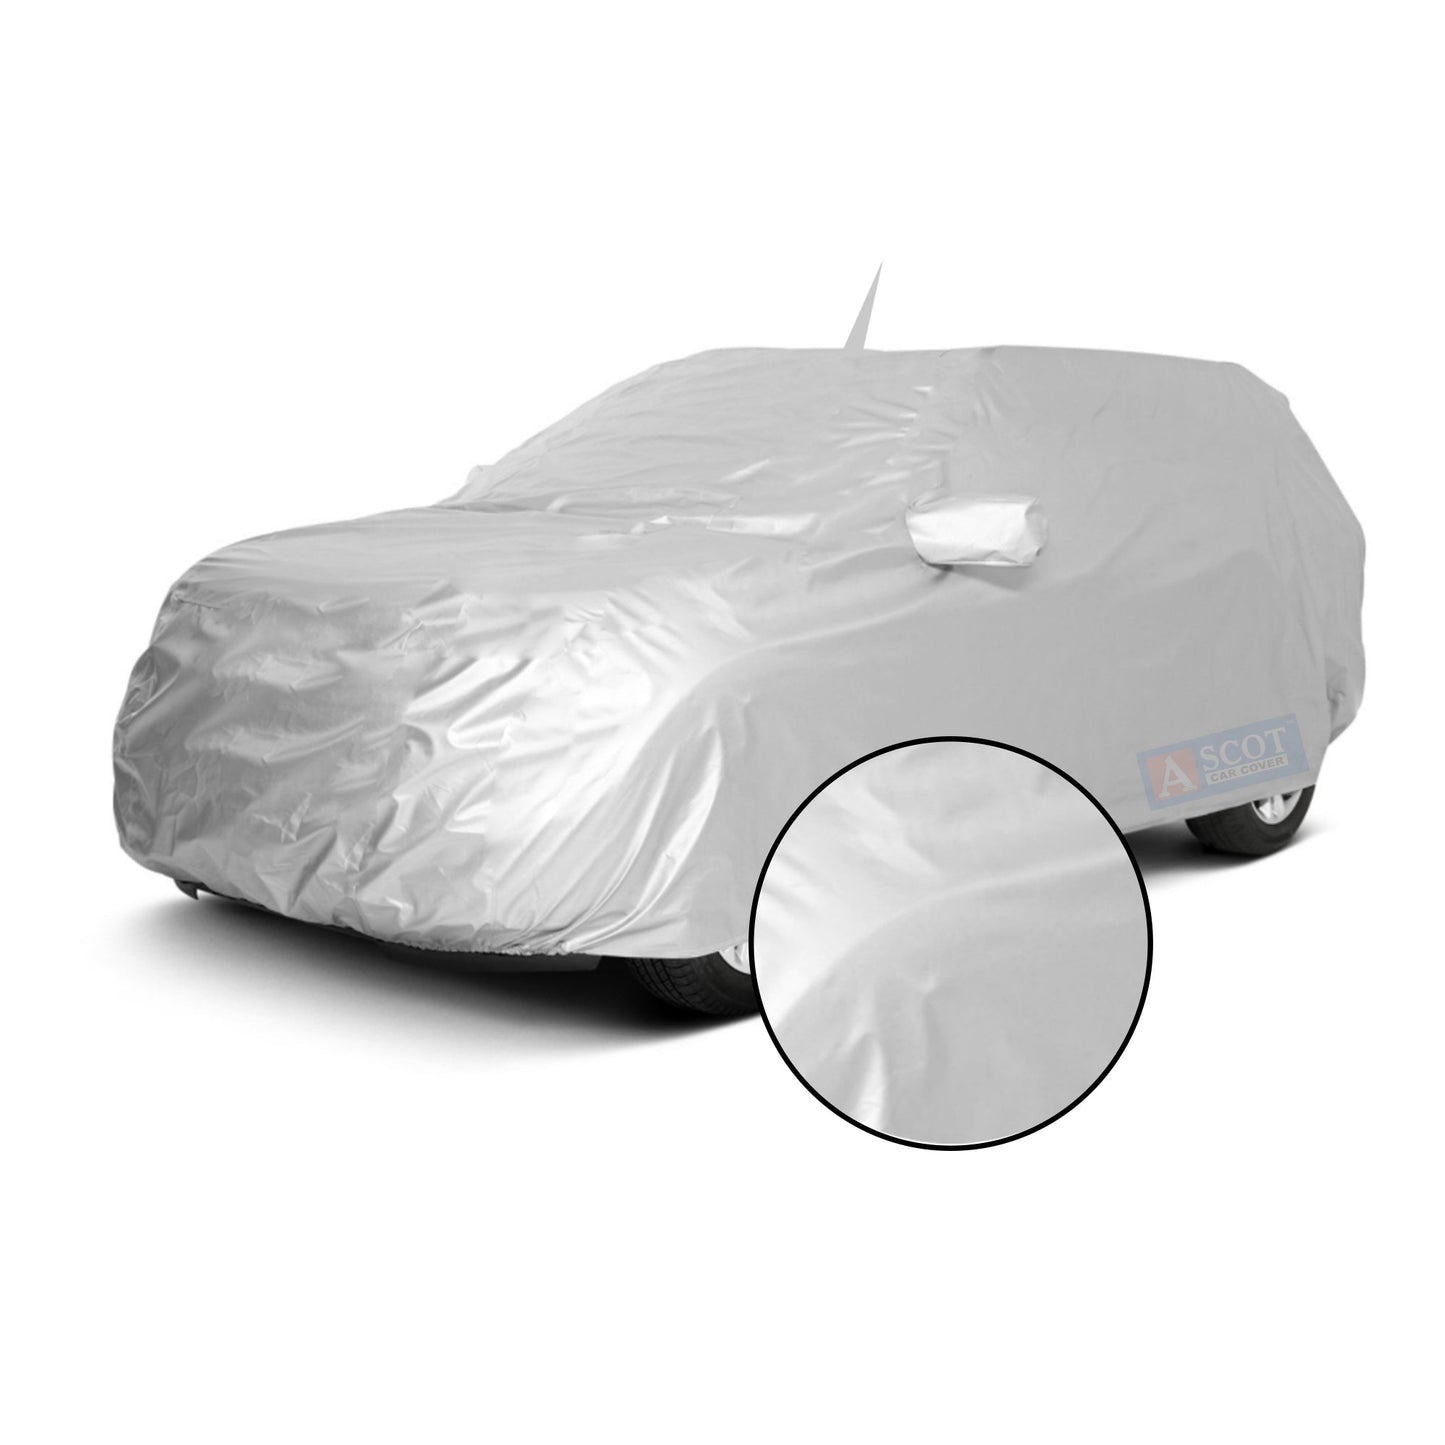 Ascot Audi RS 5 Sportback 2018-2023 Model Car Body Cover Dust Proof, Trippel Stitched